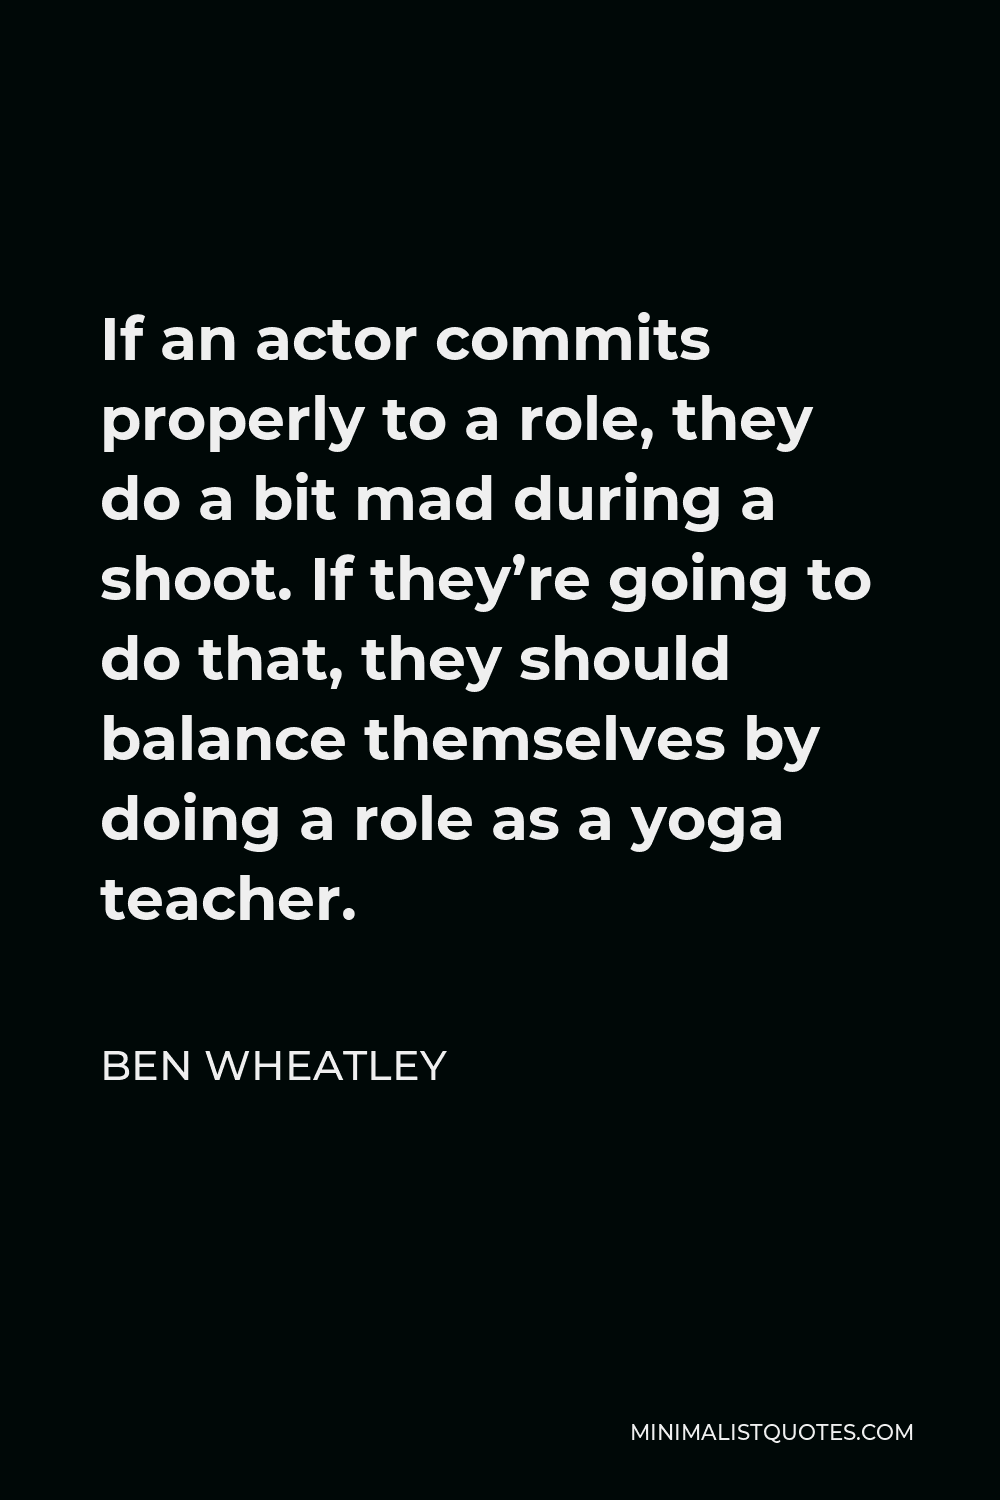 Ben Wheatley Quote - If an actor commits properly to a role, they do a bit mad during a shoot. If they’re going to do that, they should balance themselves by doing a role as a yoga teacher.